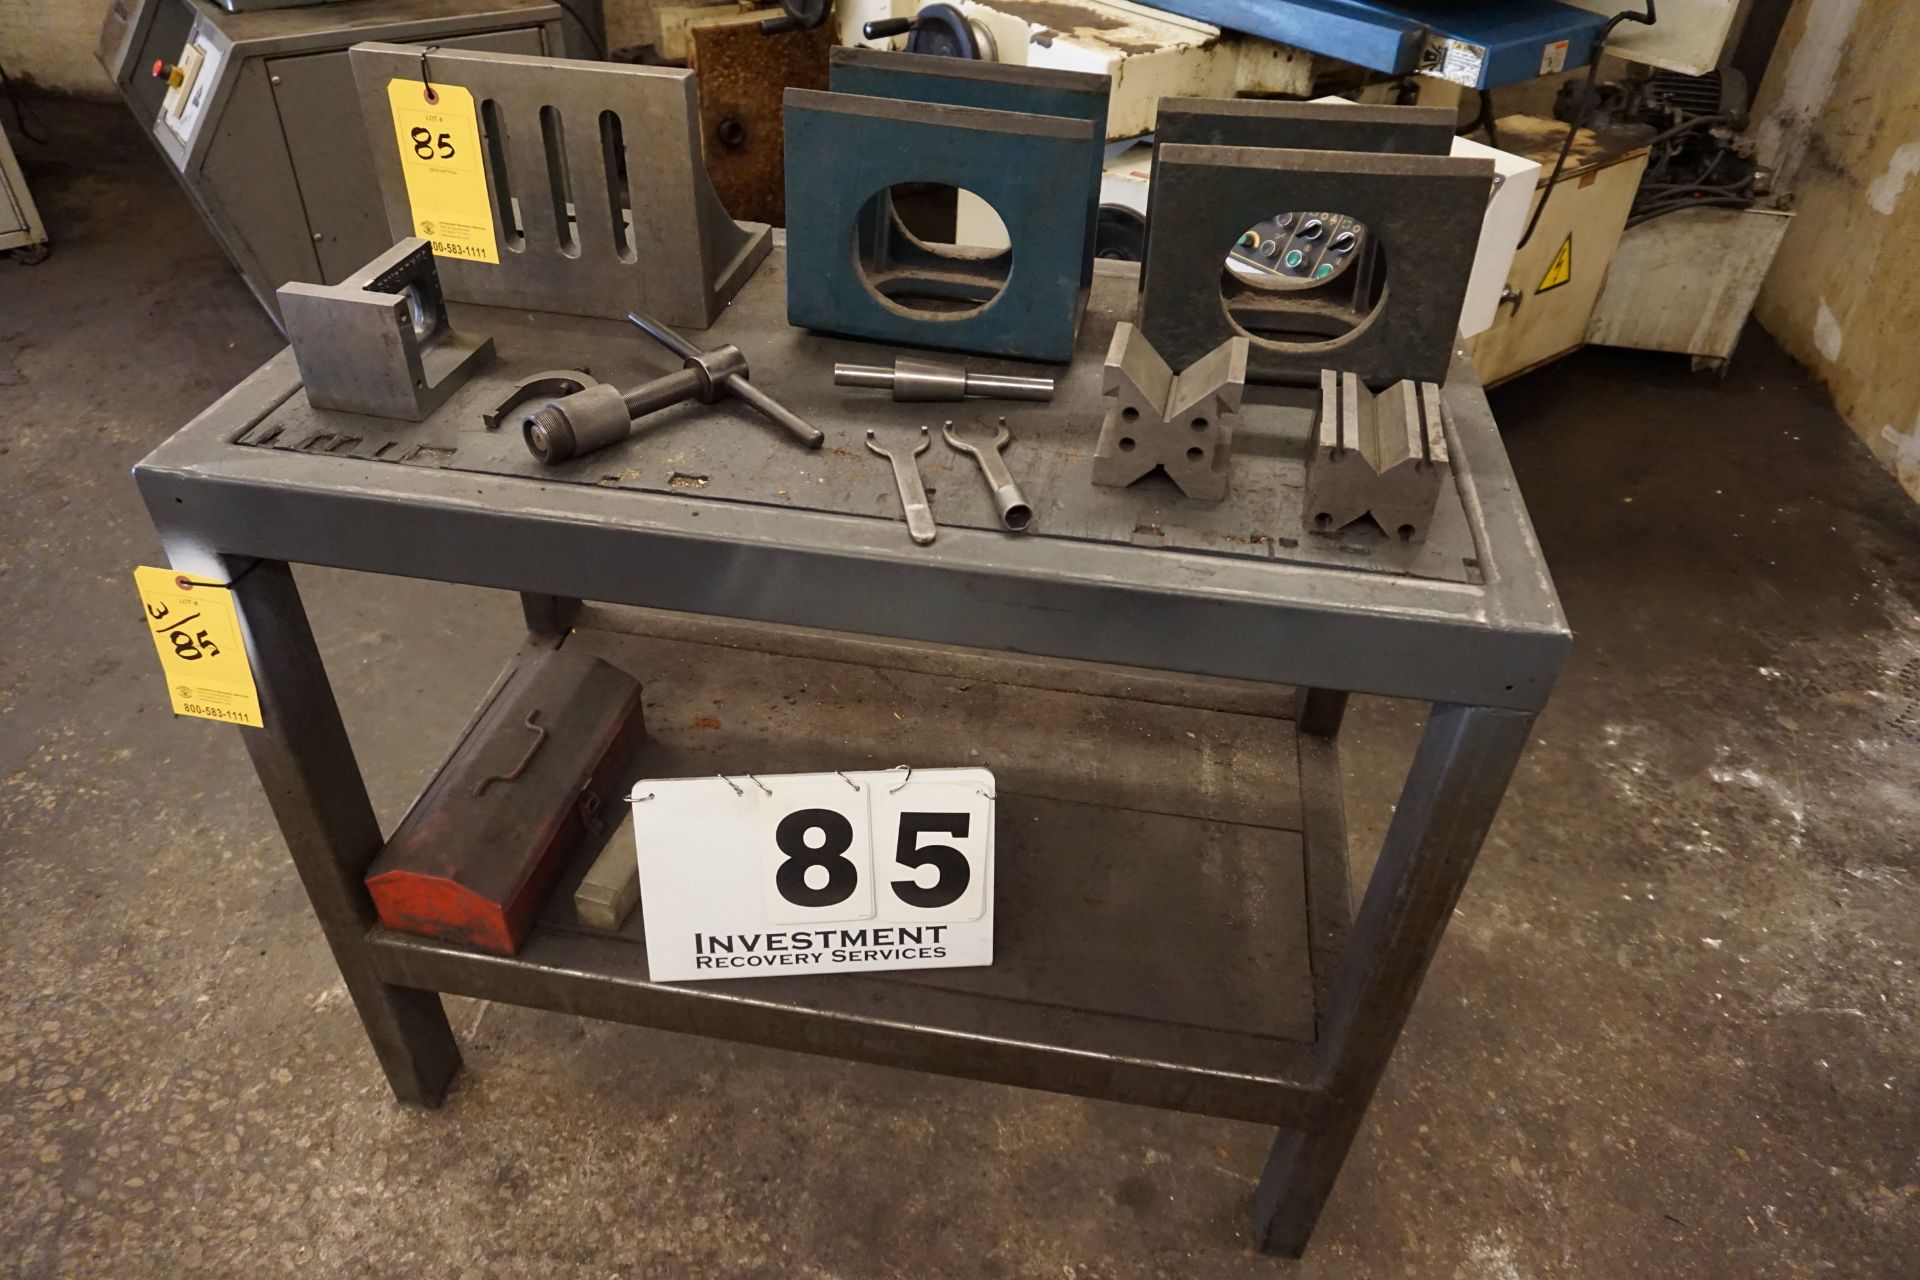 STEEL TABLE W/ RIGHT ANGLE PLATES, GRINDER ACESSORIES